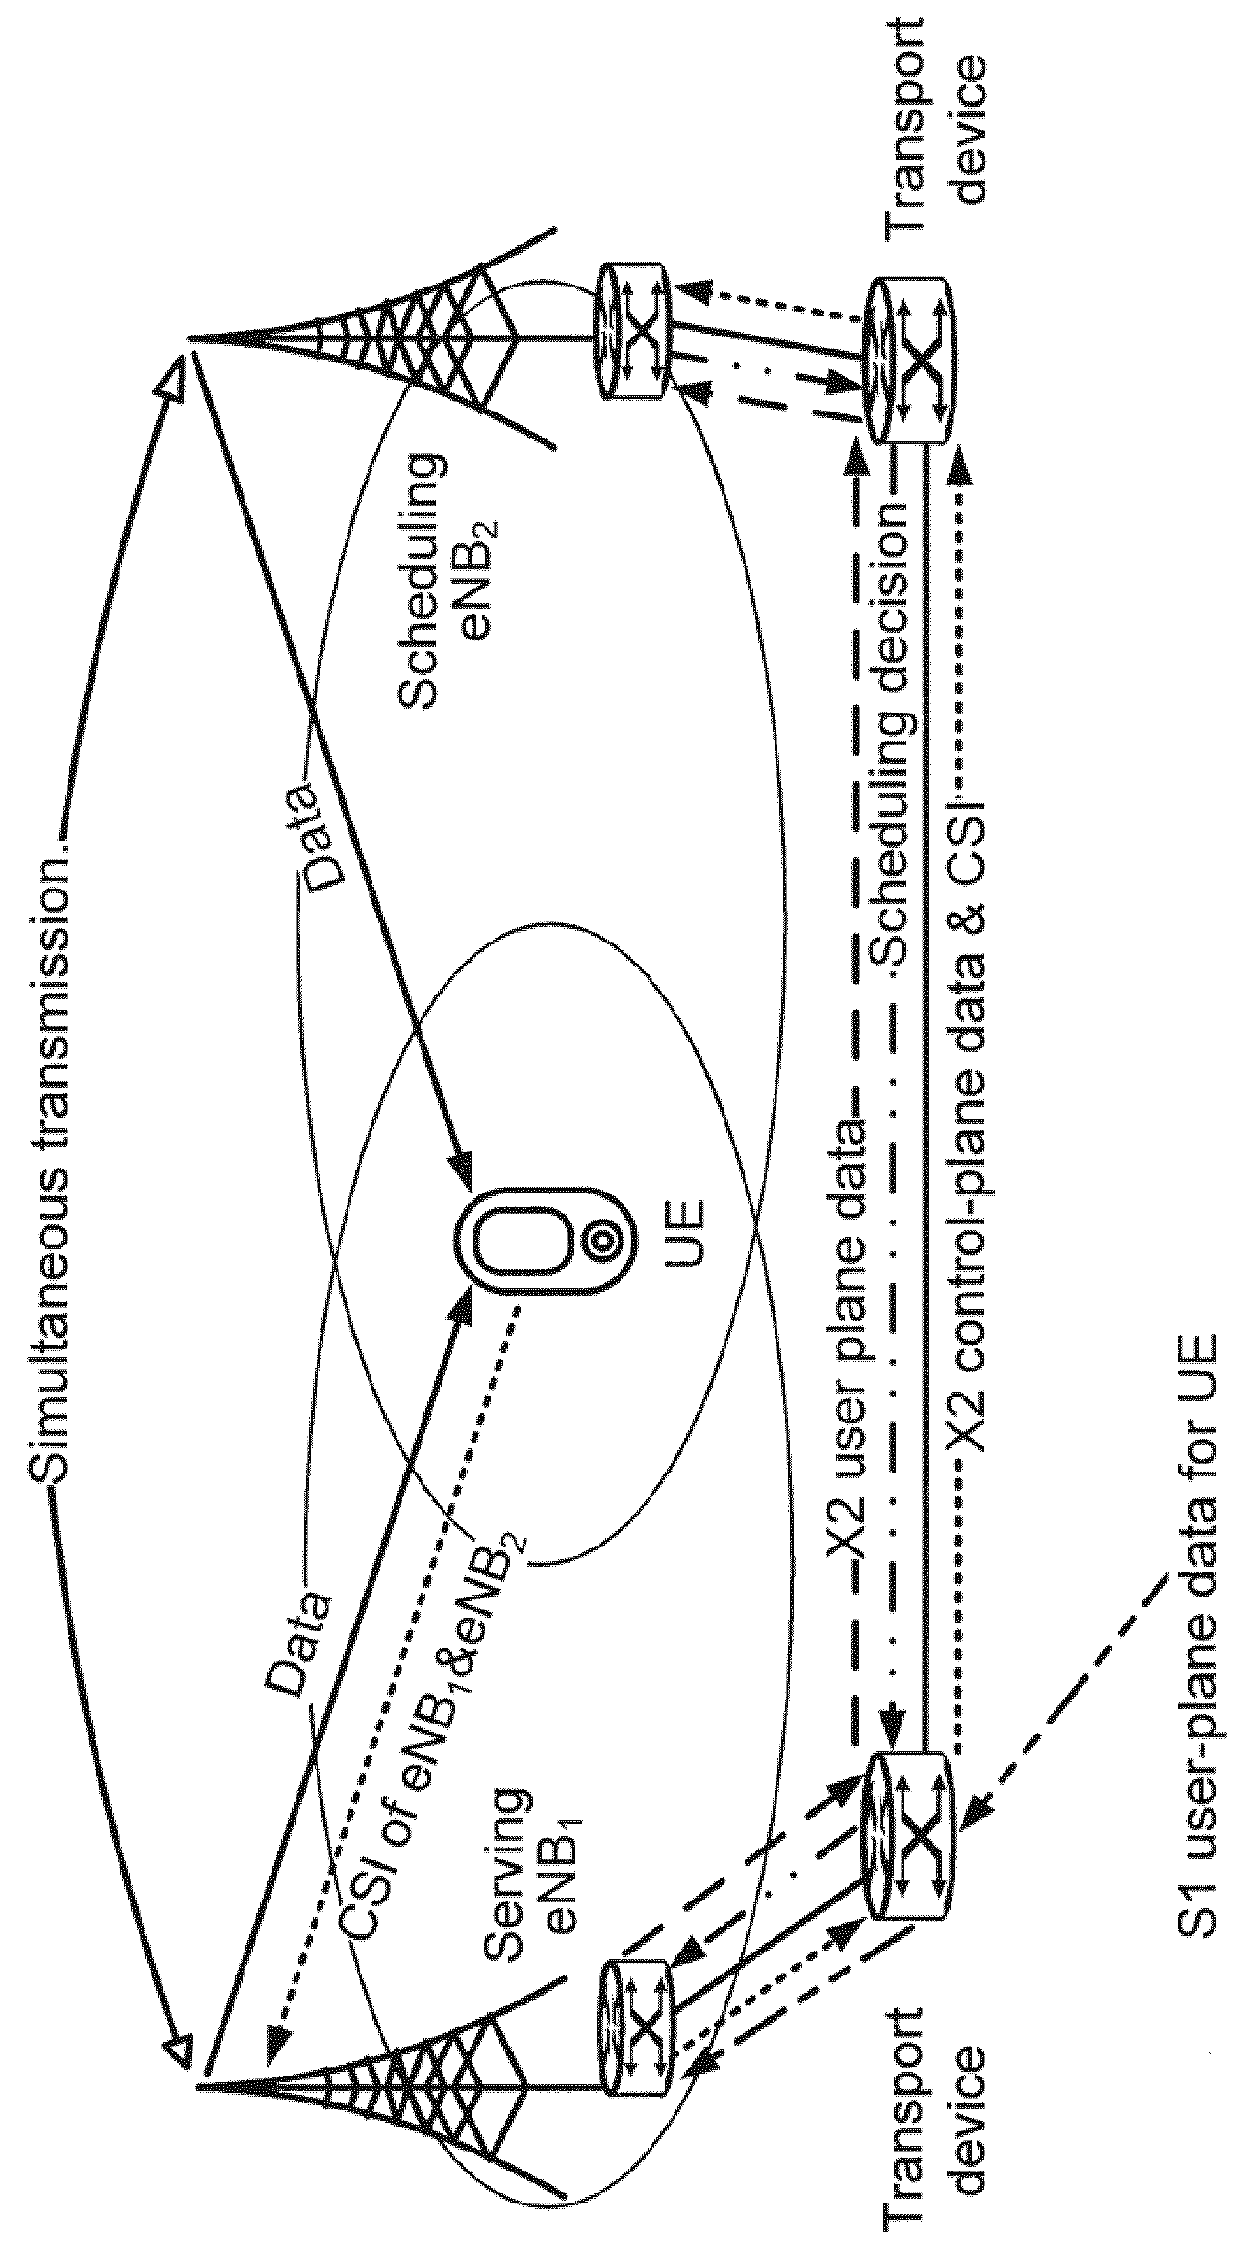 Coordinated Multipoint Joint Transmission with Relaxed Backhaul Requirements